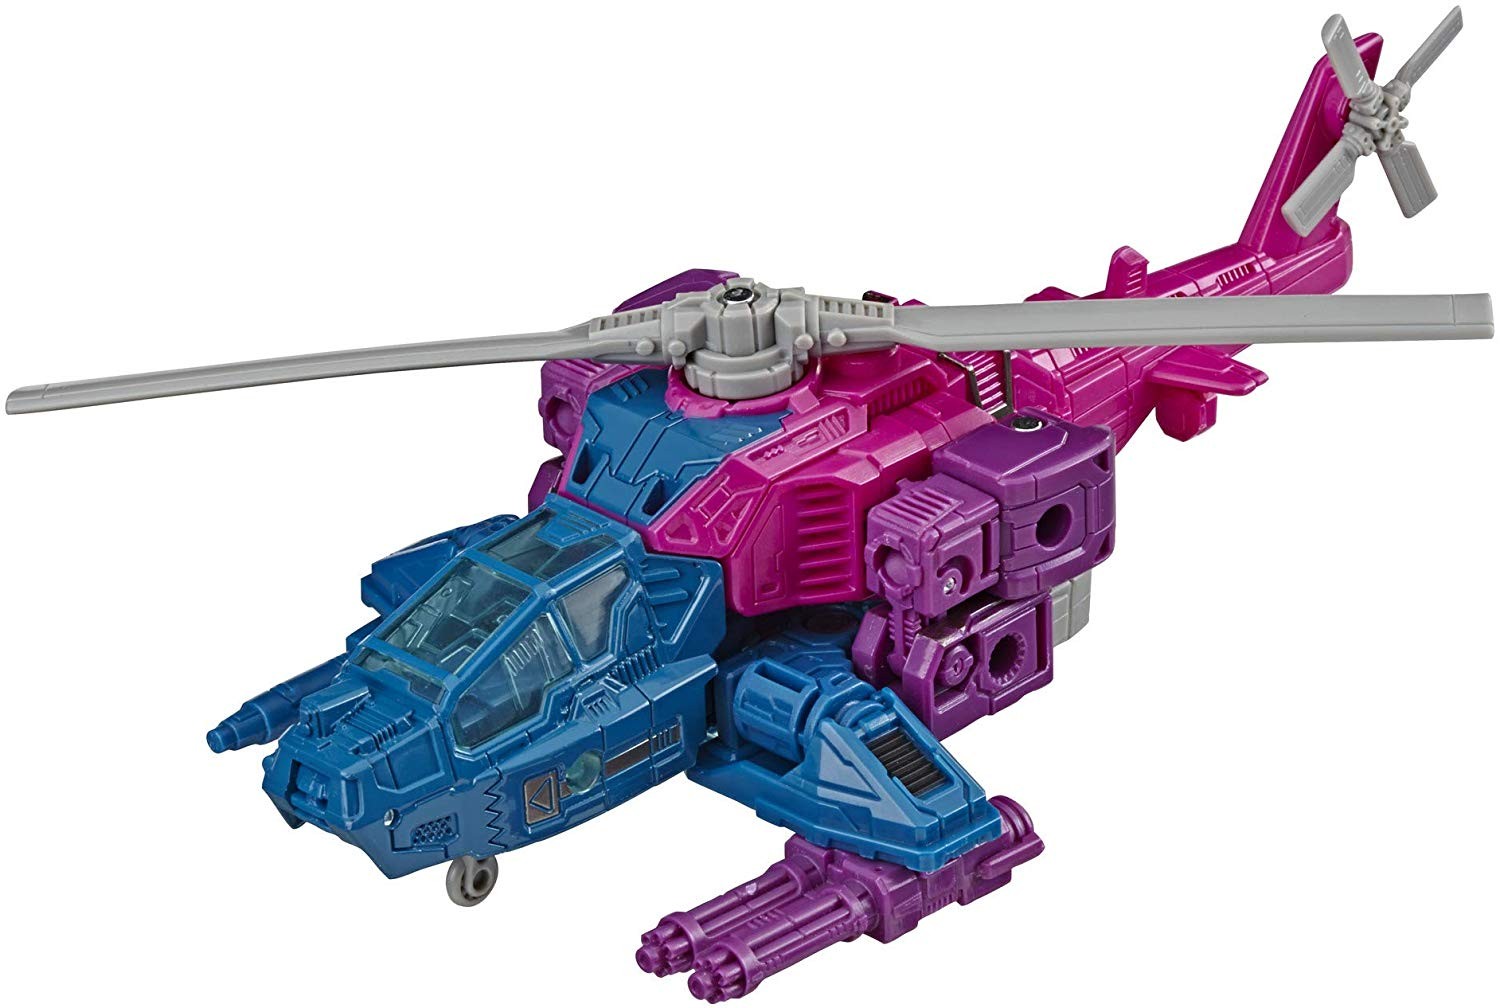 Transformers News: Just-released Studio Series and SIEGE figures available on Amazon.com